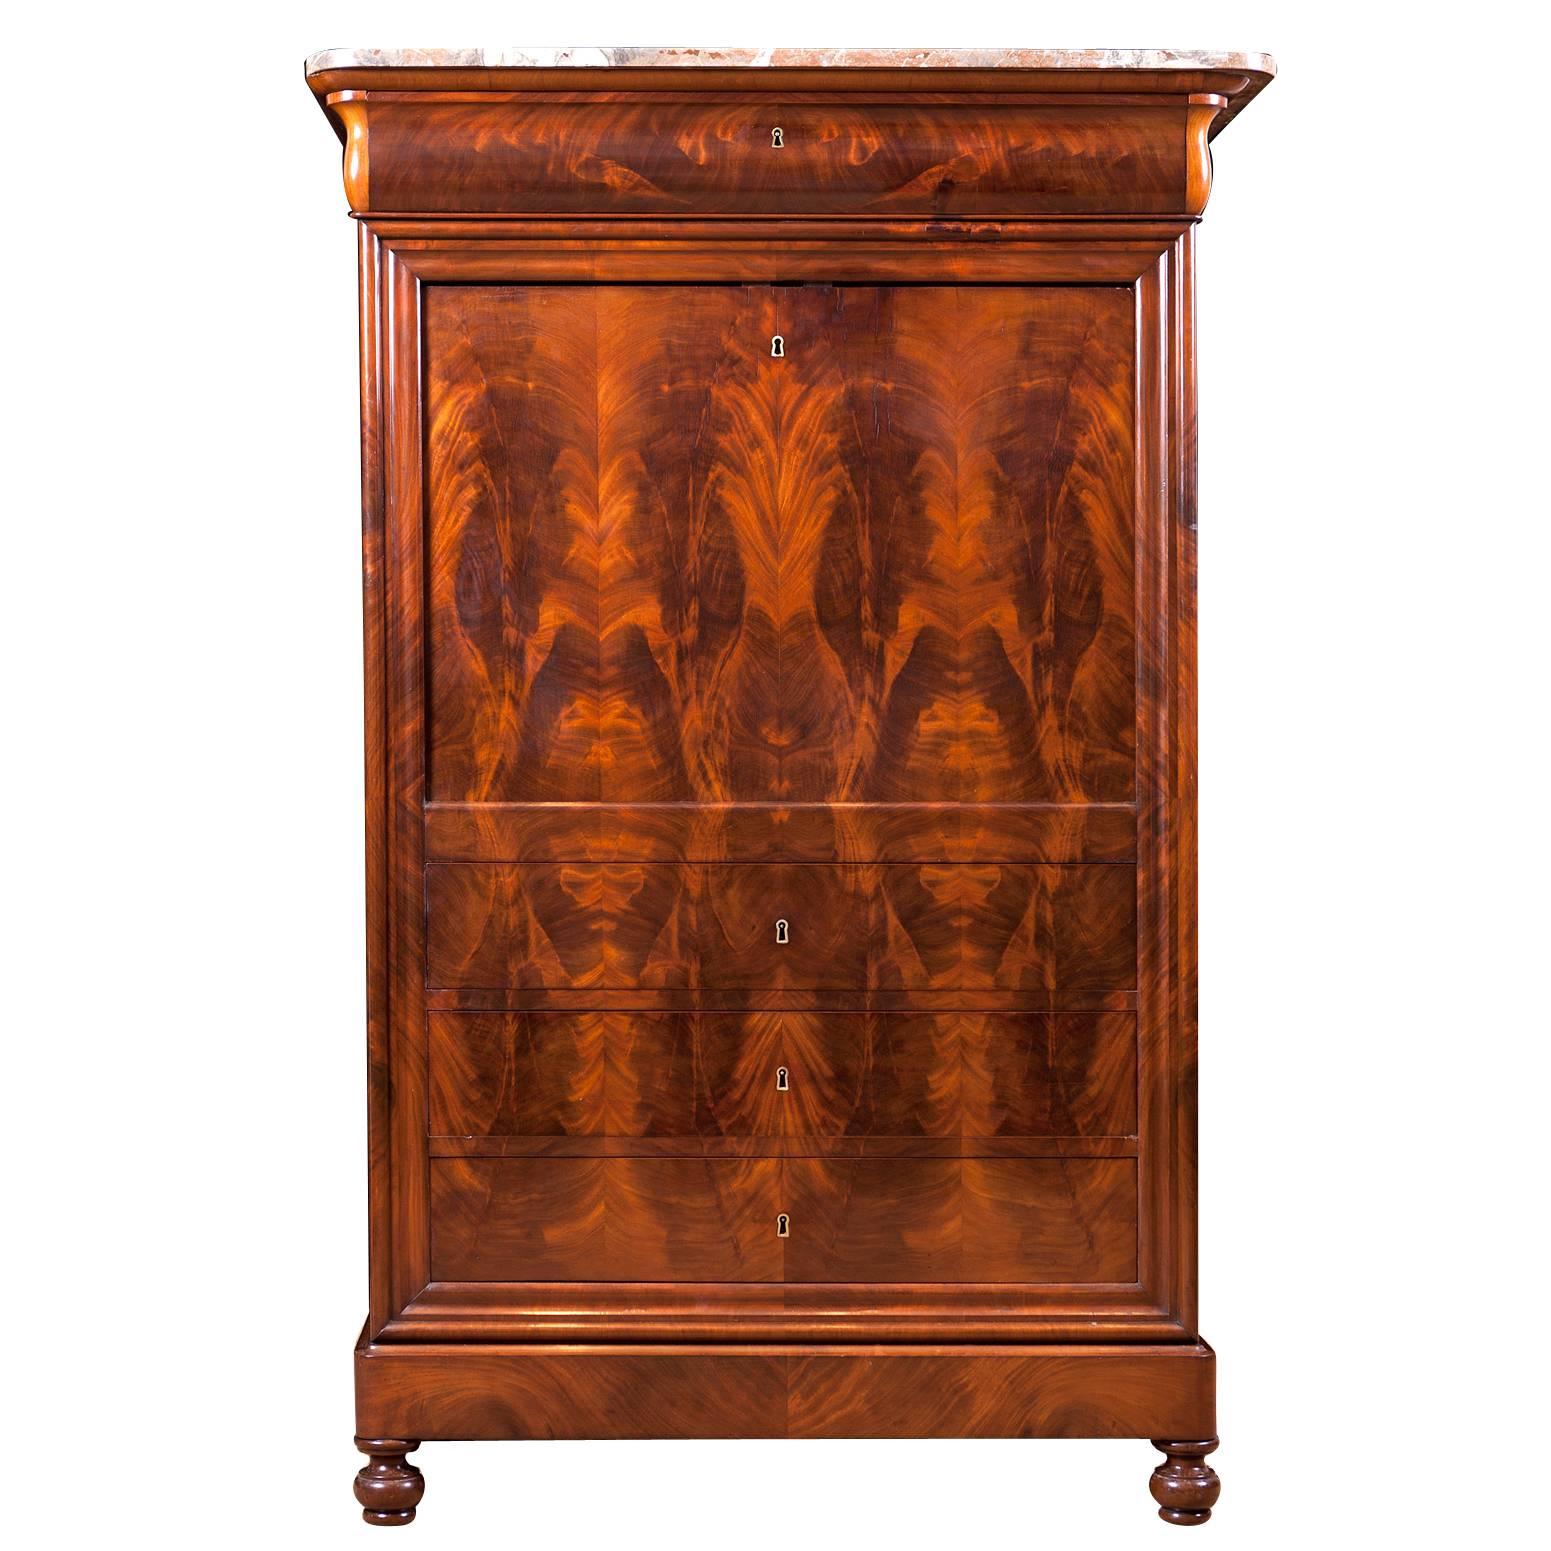 French Louis Philippe fall front secretary in mahogany with original marble top and bird's-eye maple interior, circa 1835. Beautiful crotch mahogany center matched pattern from the bottom drawer to the top of fall front.

Measures: 41 1/2